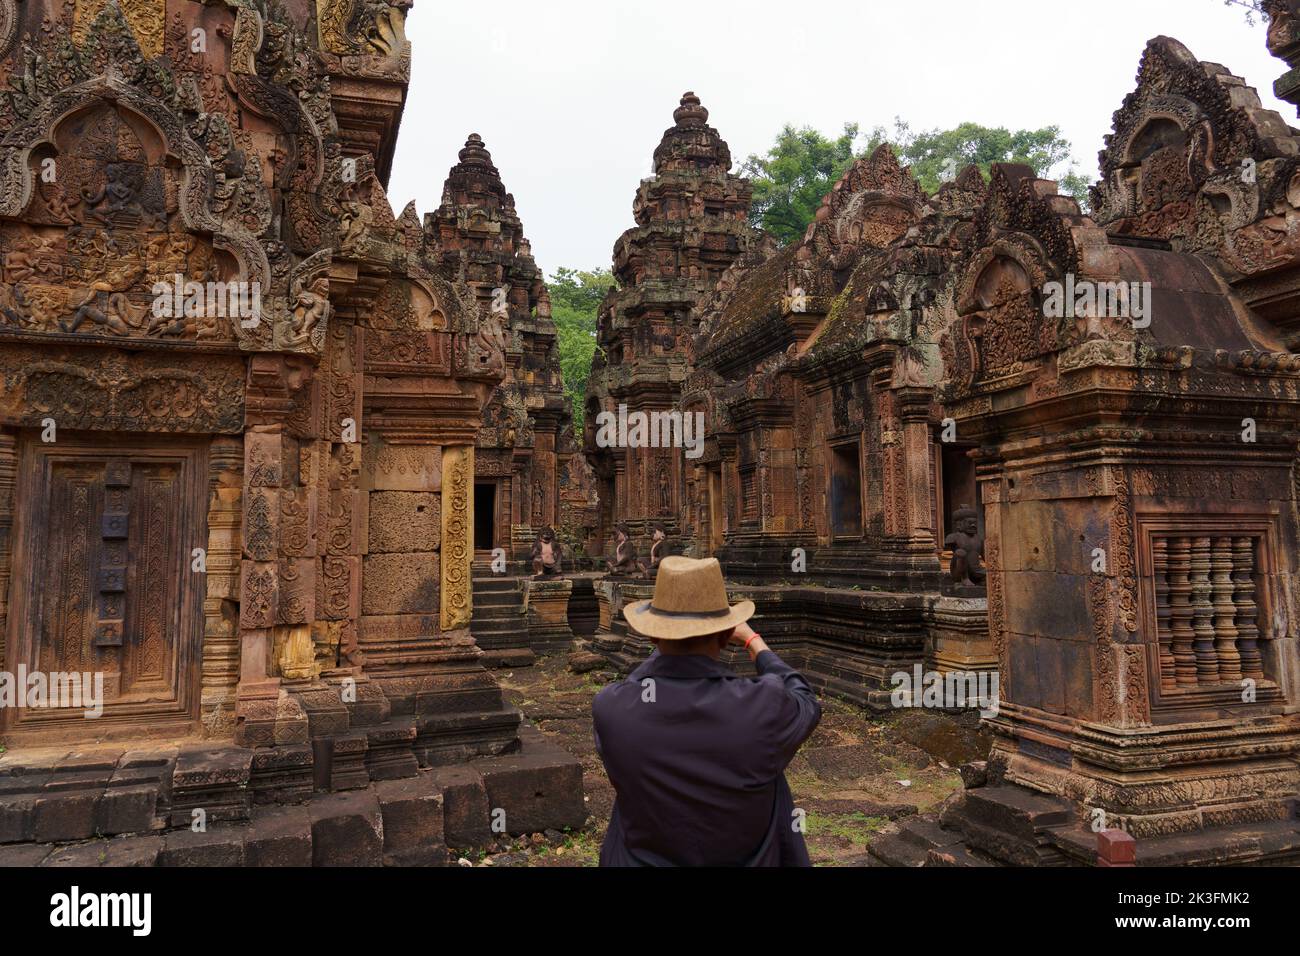 Cambodia. Siem Reap. The archaeological park of Angkor. A man photographs the temple of Banteay Srei 10th century Hindu temple dedicated to Shiva Stock Photo